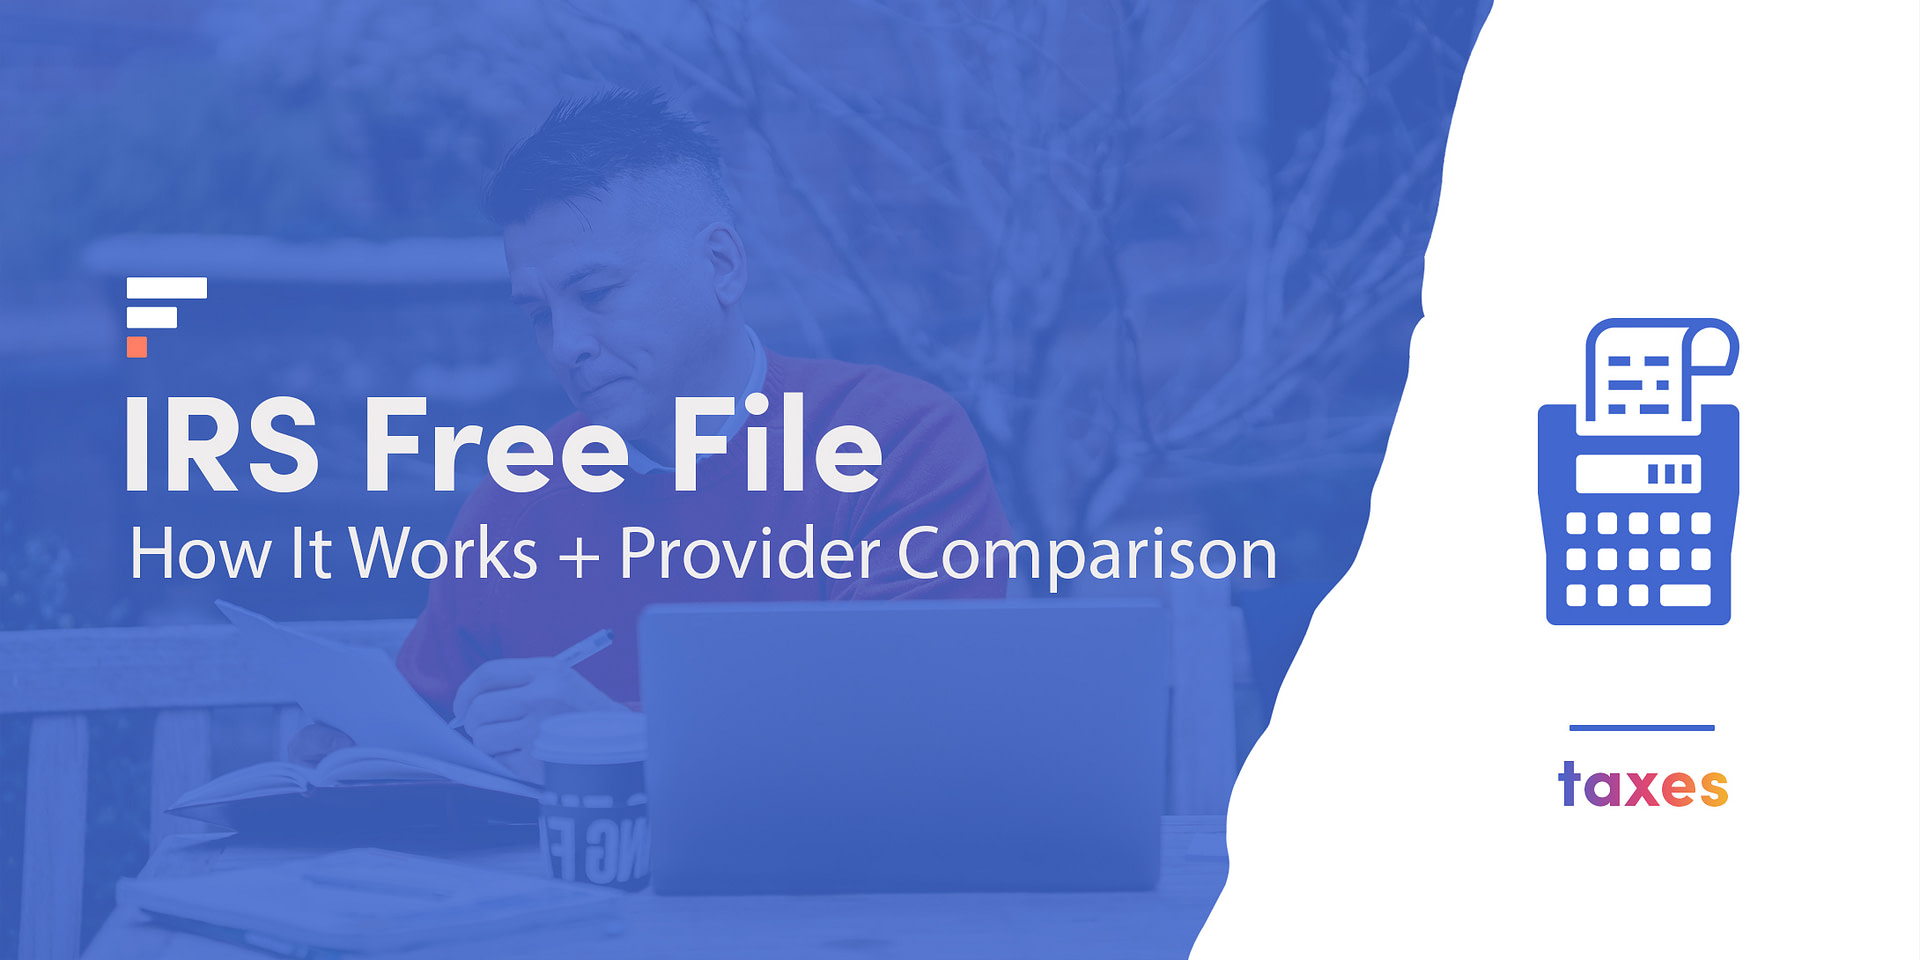 IRS Free File How It Works & Provider Comparison